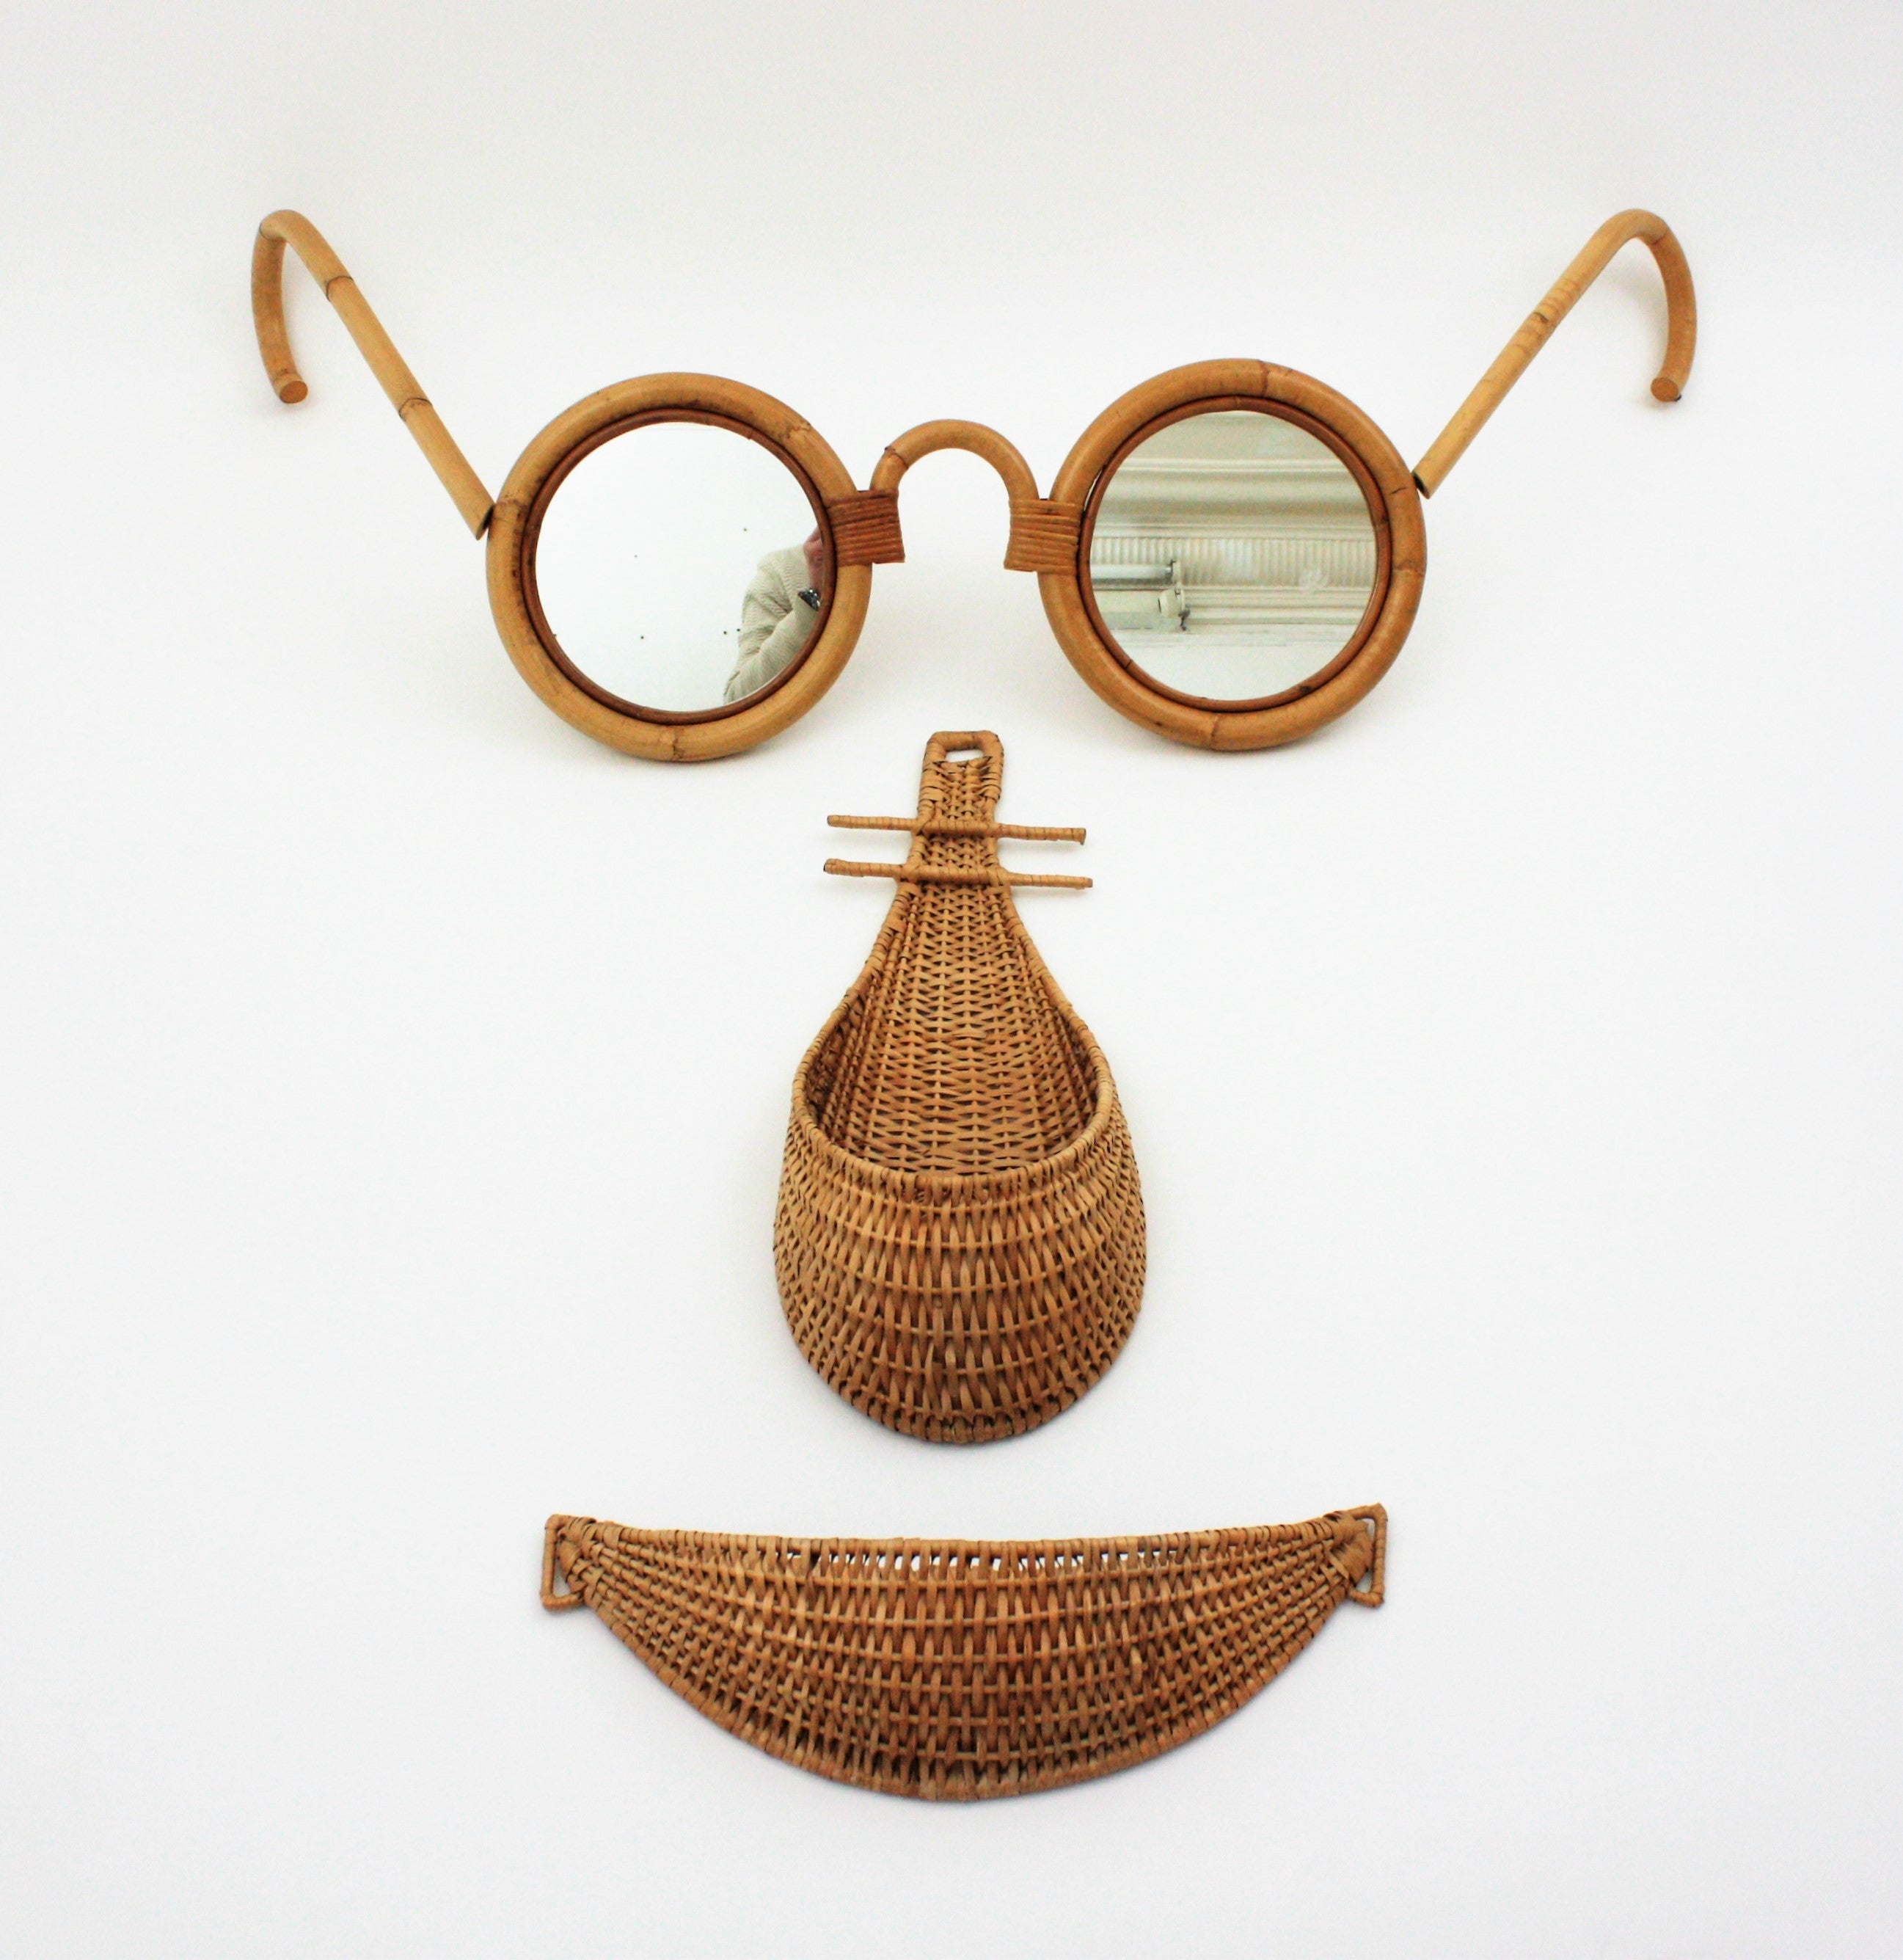 One of a kind giant eyeglasses face wall art / wall decoration, Spain, 1960-1970.
This eye-catching wall composition features giant bamboo glasses with mirrors and two wicker baskets as nose and mouth.
The eyeglasses sculpture are shaped in a